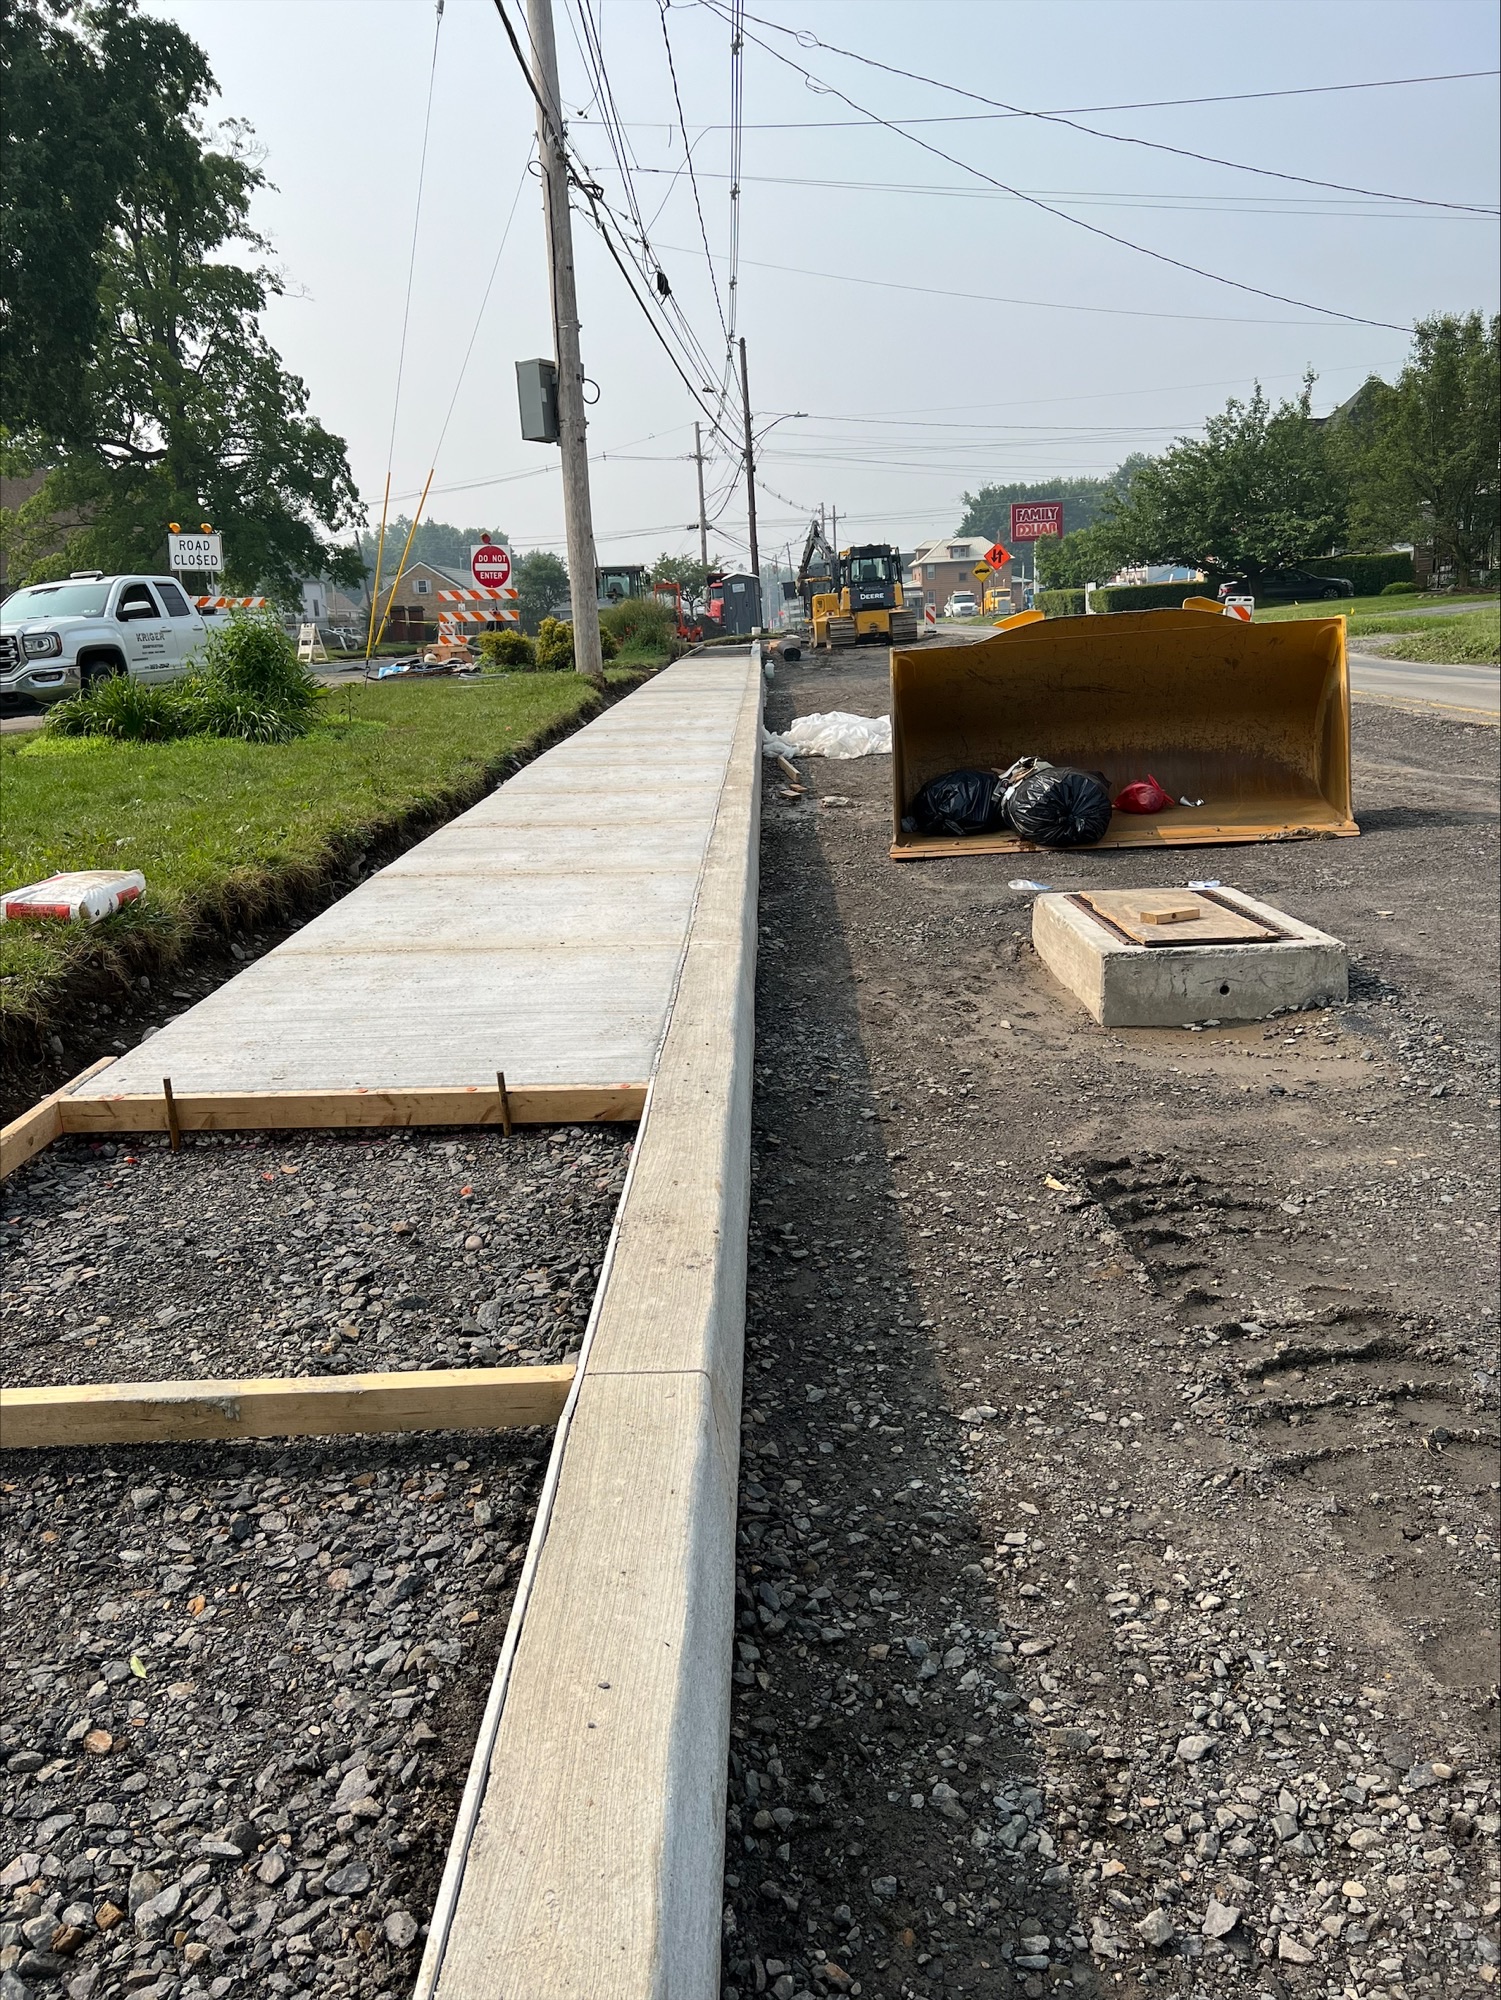 Sidewalk construction in process along PA State Route 199-010.